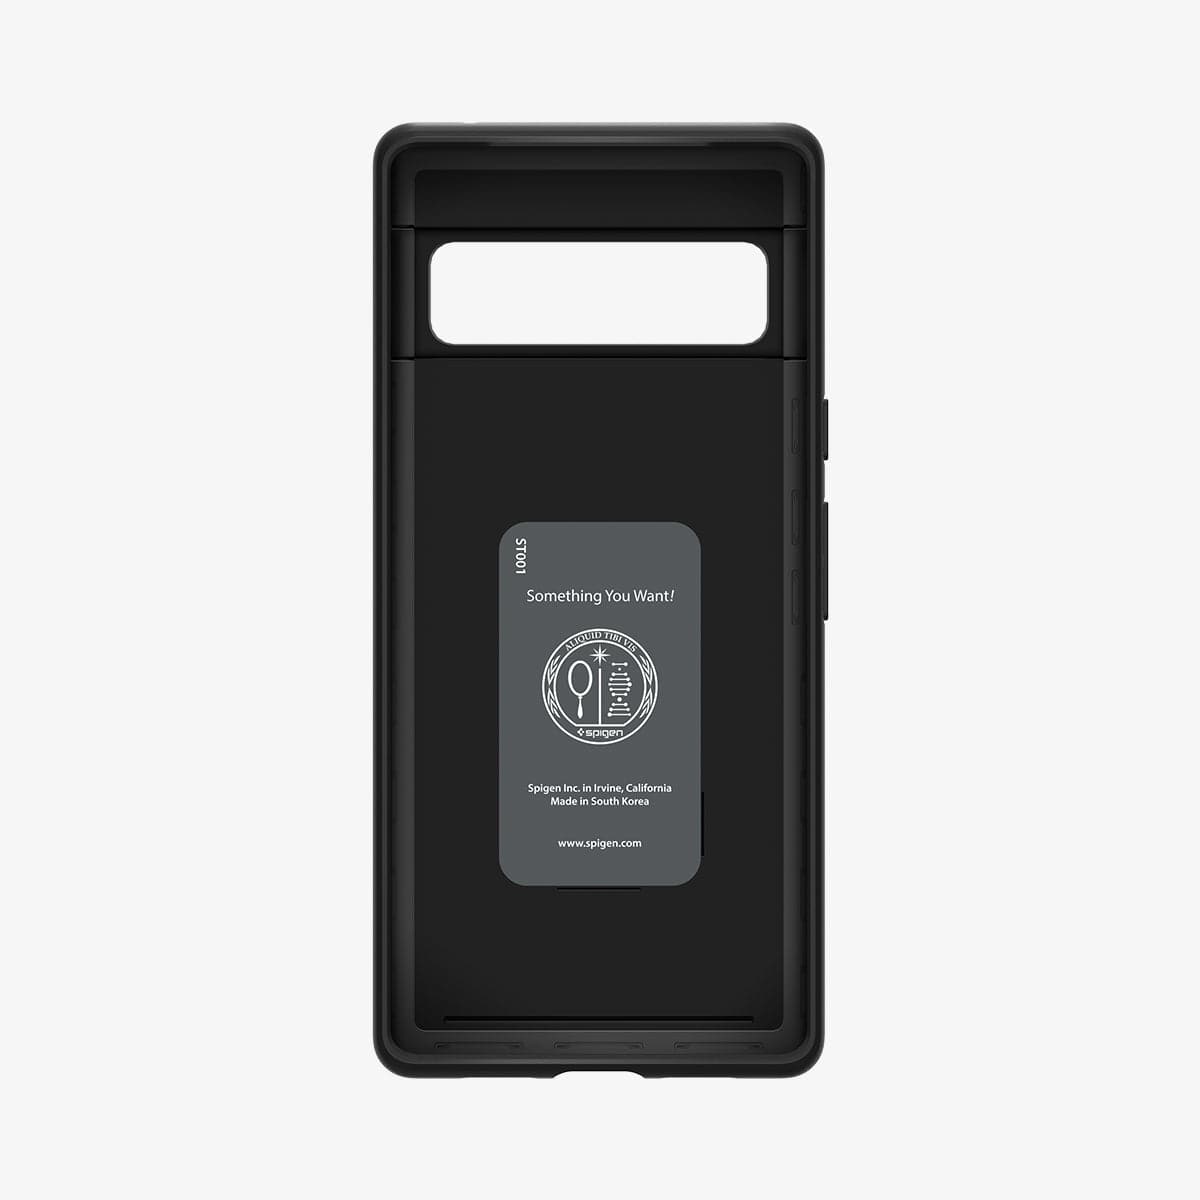 ACS03454 - Pixel 6 Pro Case Thin Fit in black showing the inside of case